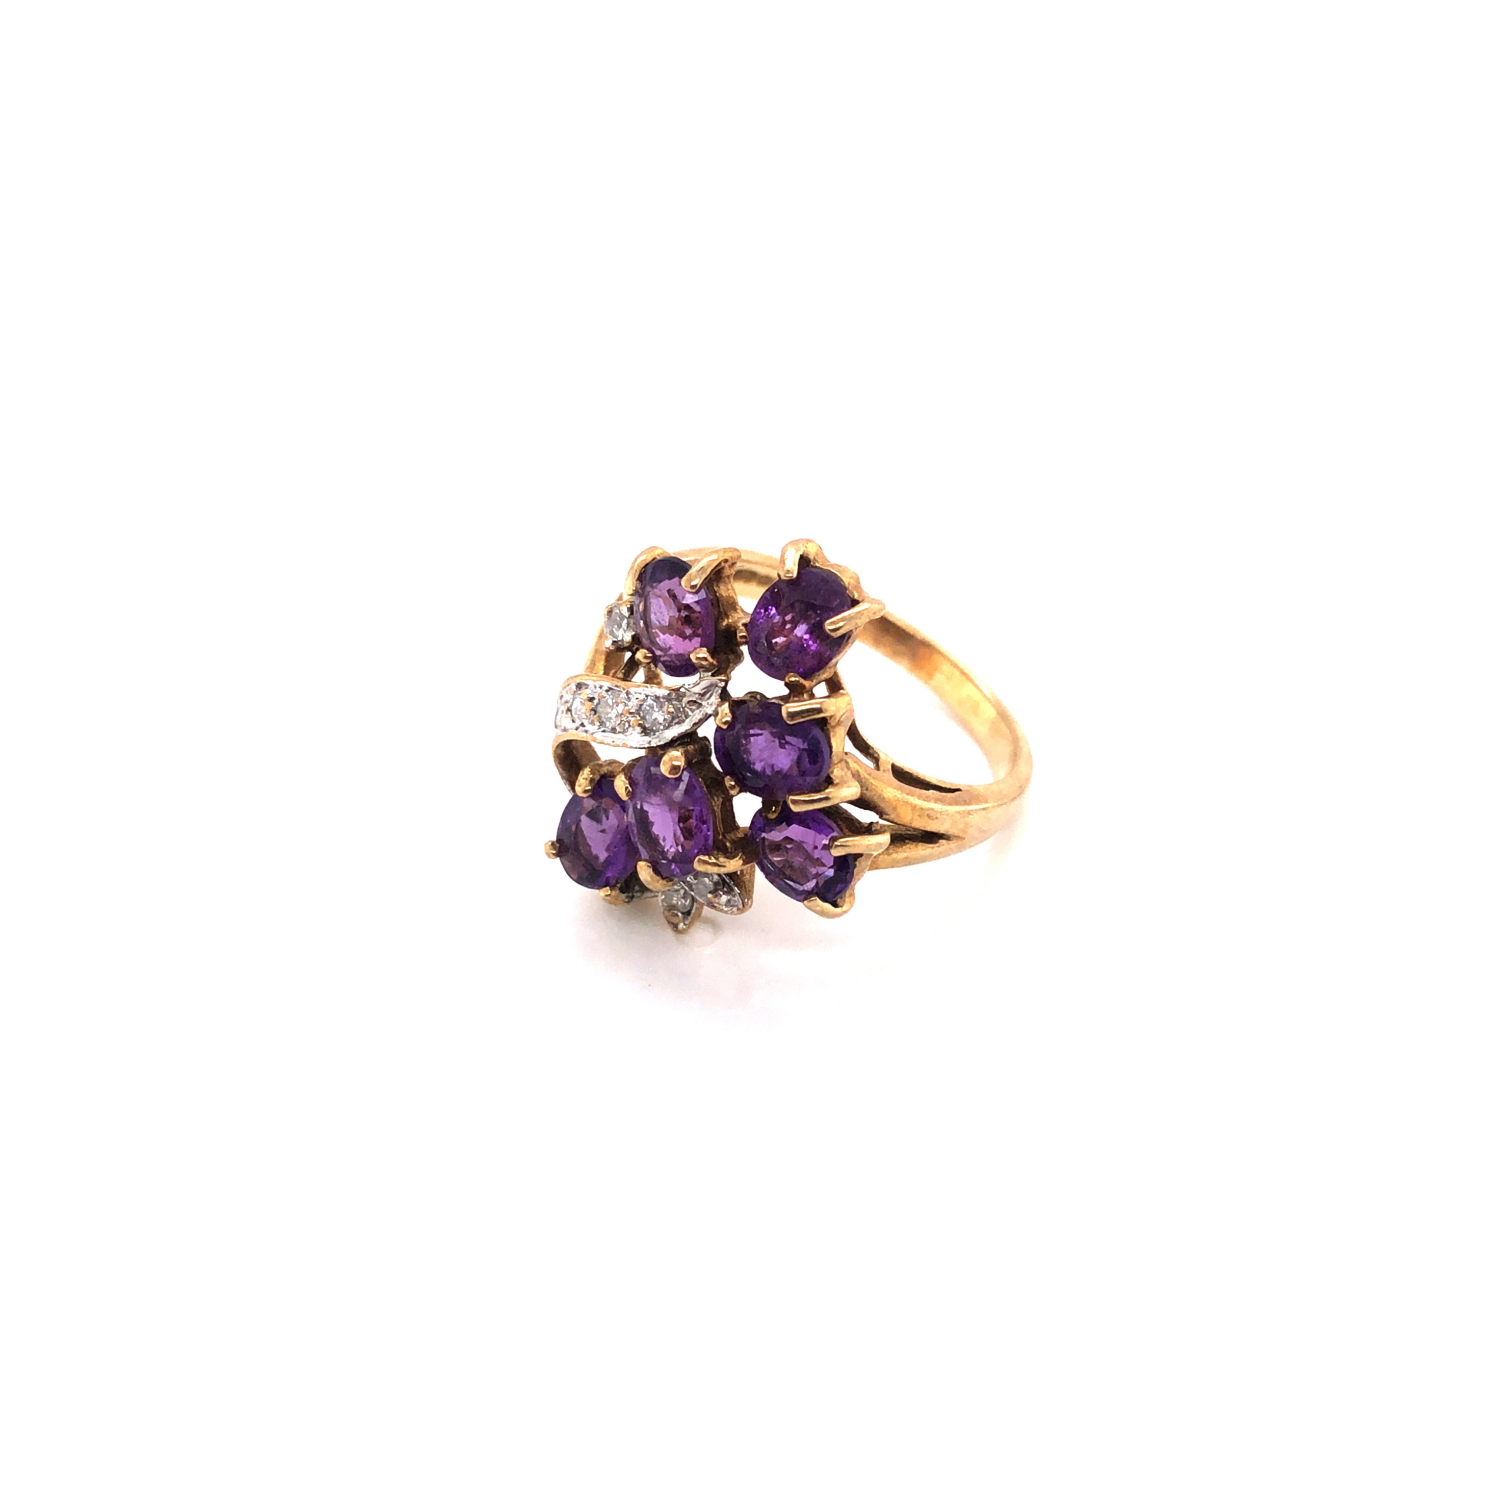 A VINTAGE HALLMARKED 9ct GOLD AMETHYST AND DIAMOND ASYMMETRIC FOLIATE DESIGN RING. DATED 1992, - Image 4 of 5